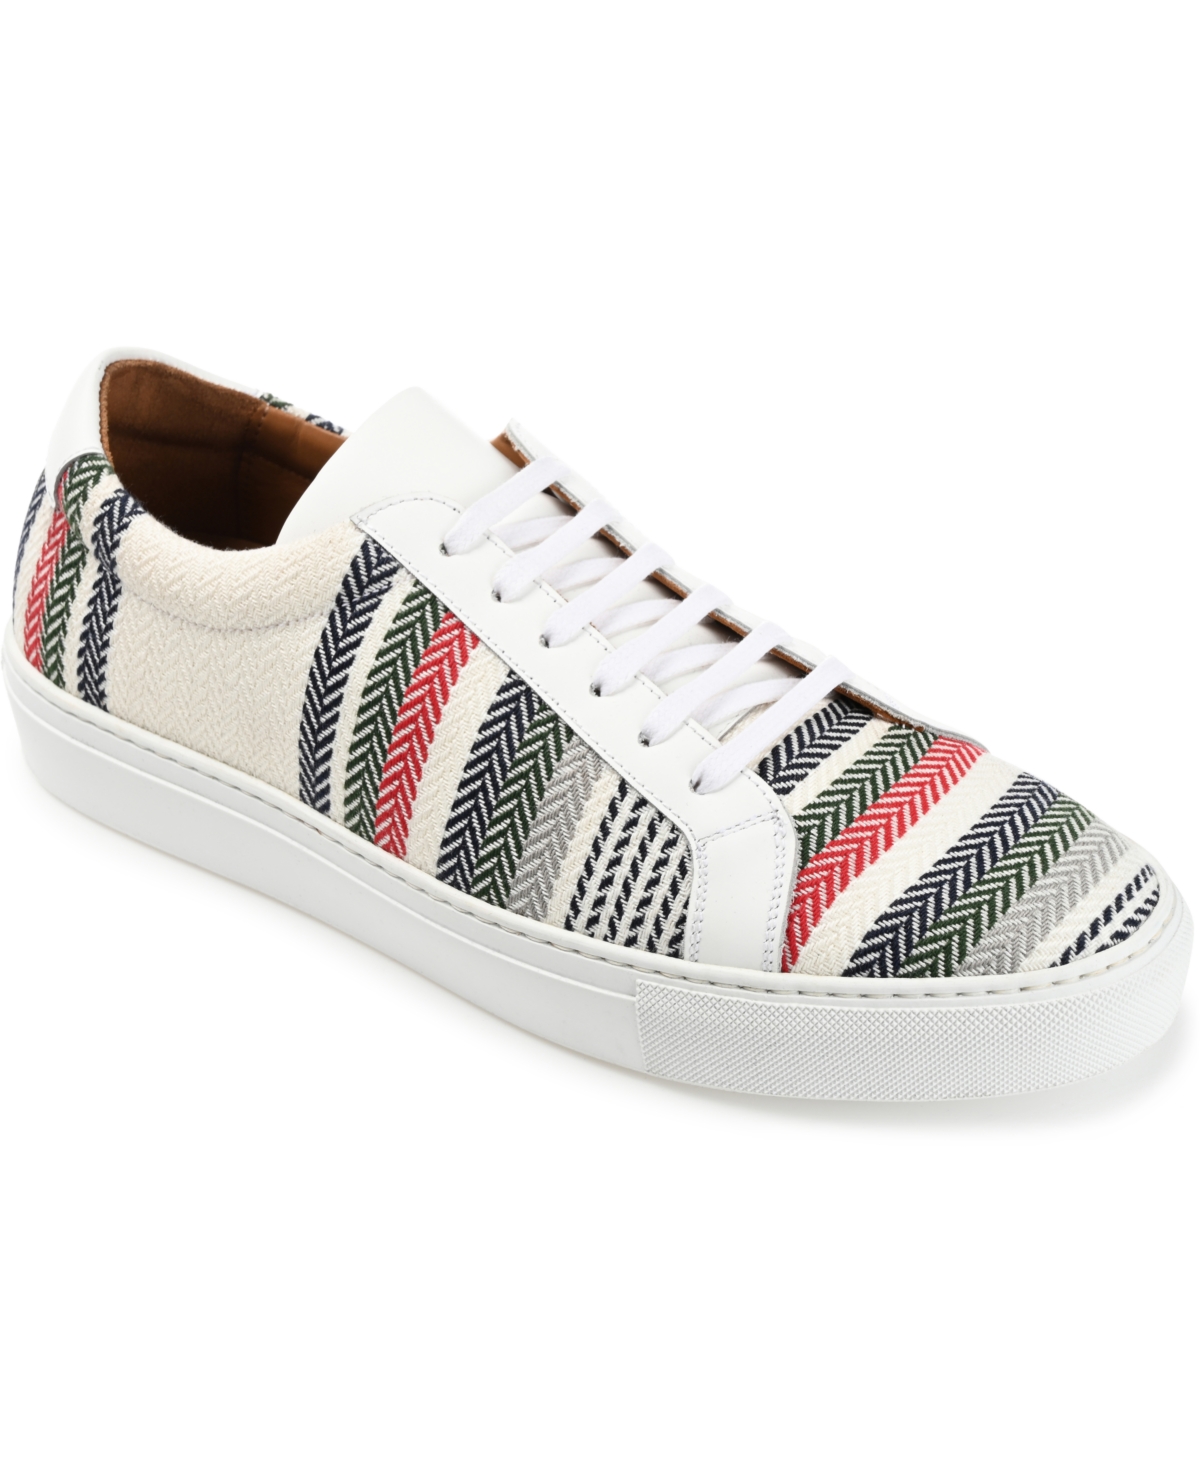 Men's Jack Handcrafted Leather and Water-repellent Sneakers - Kashmir